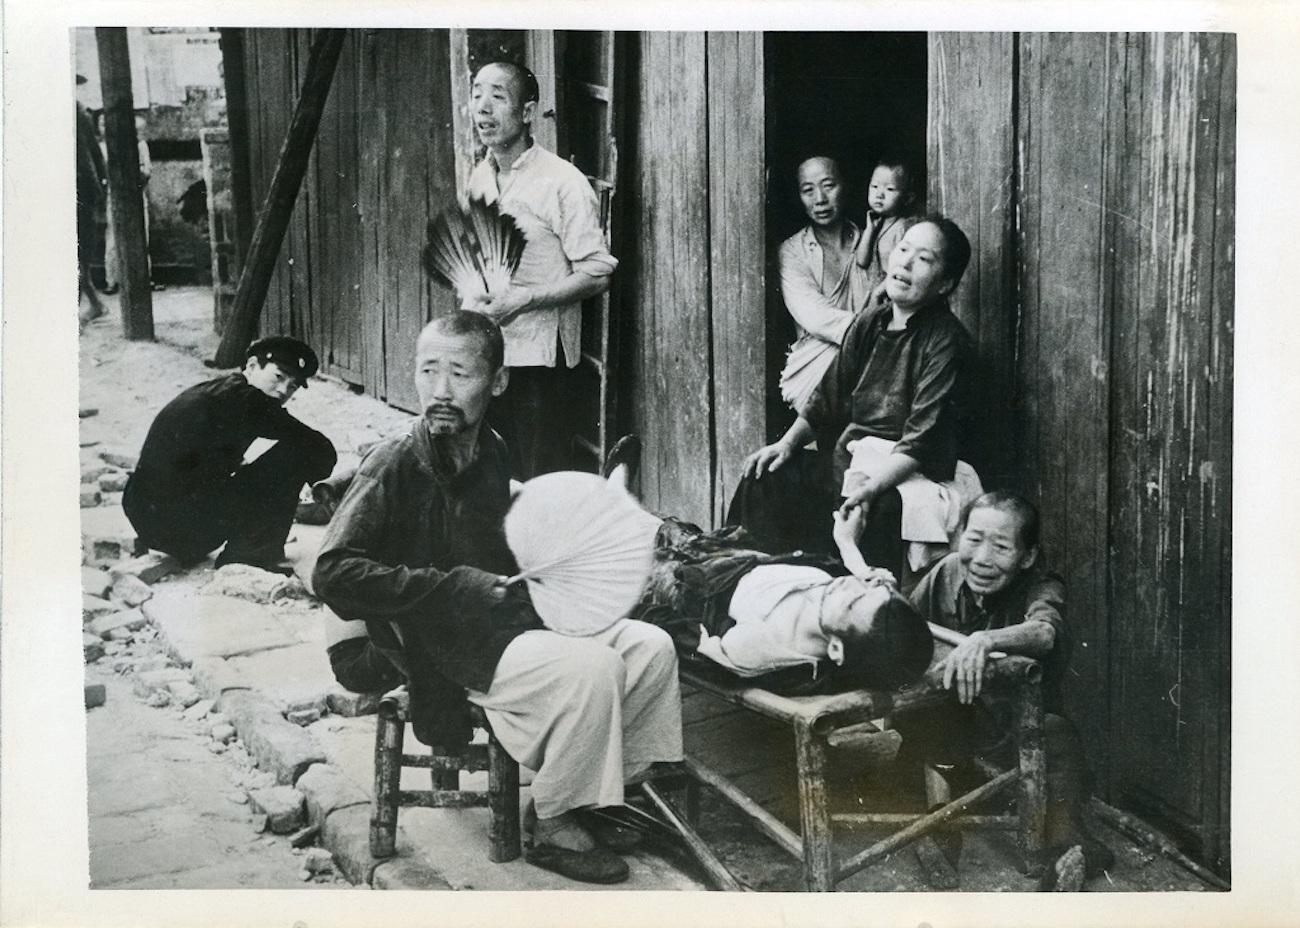 Unknown Black and White Photograph - Evacuees in Hankou - Vintage Photo 1938